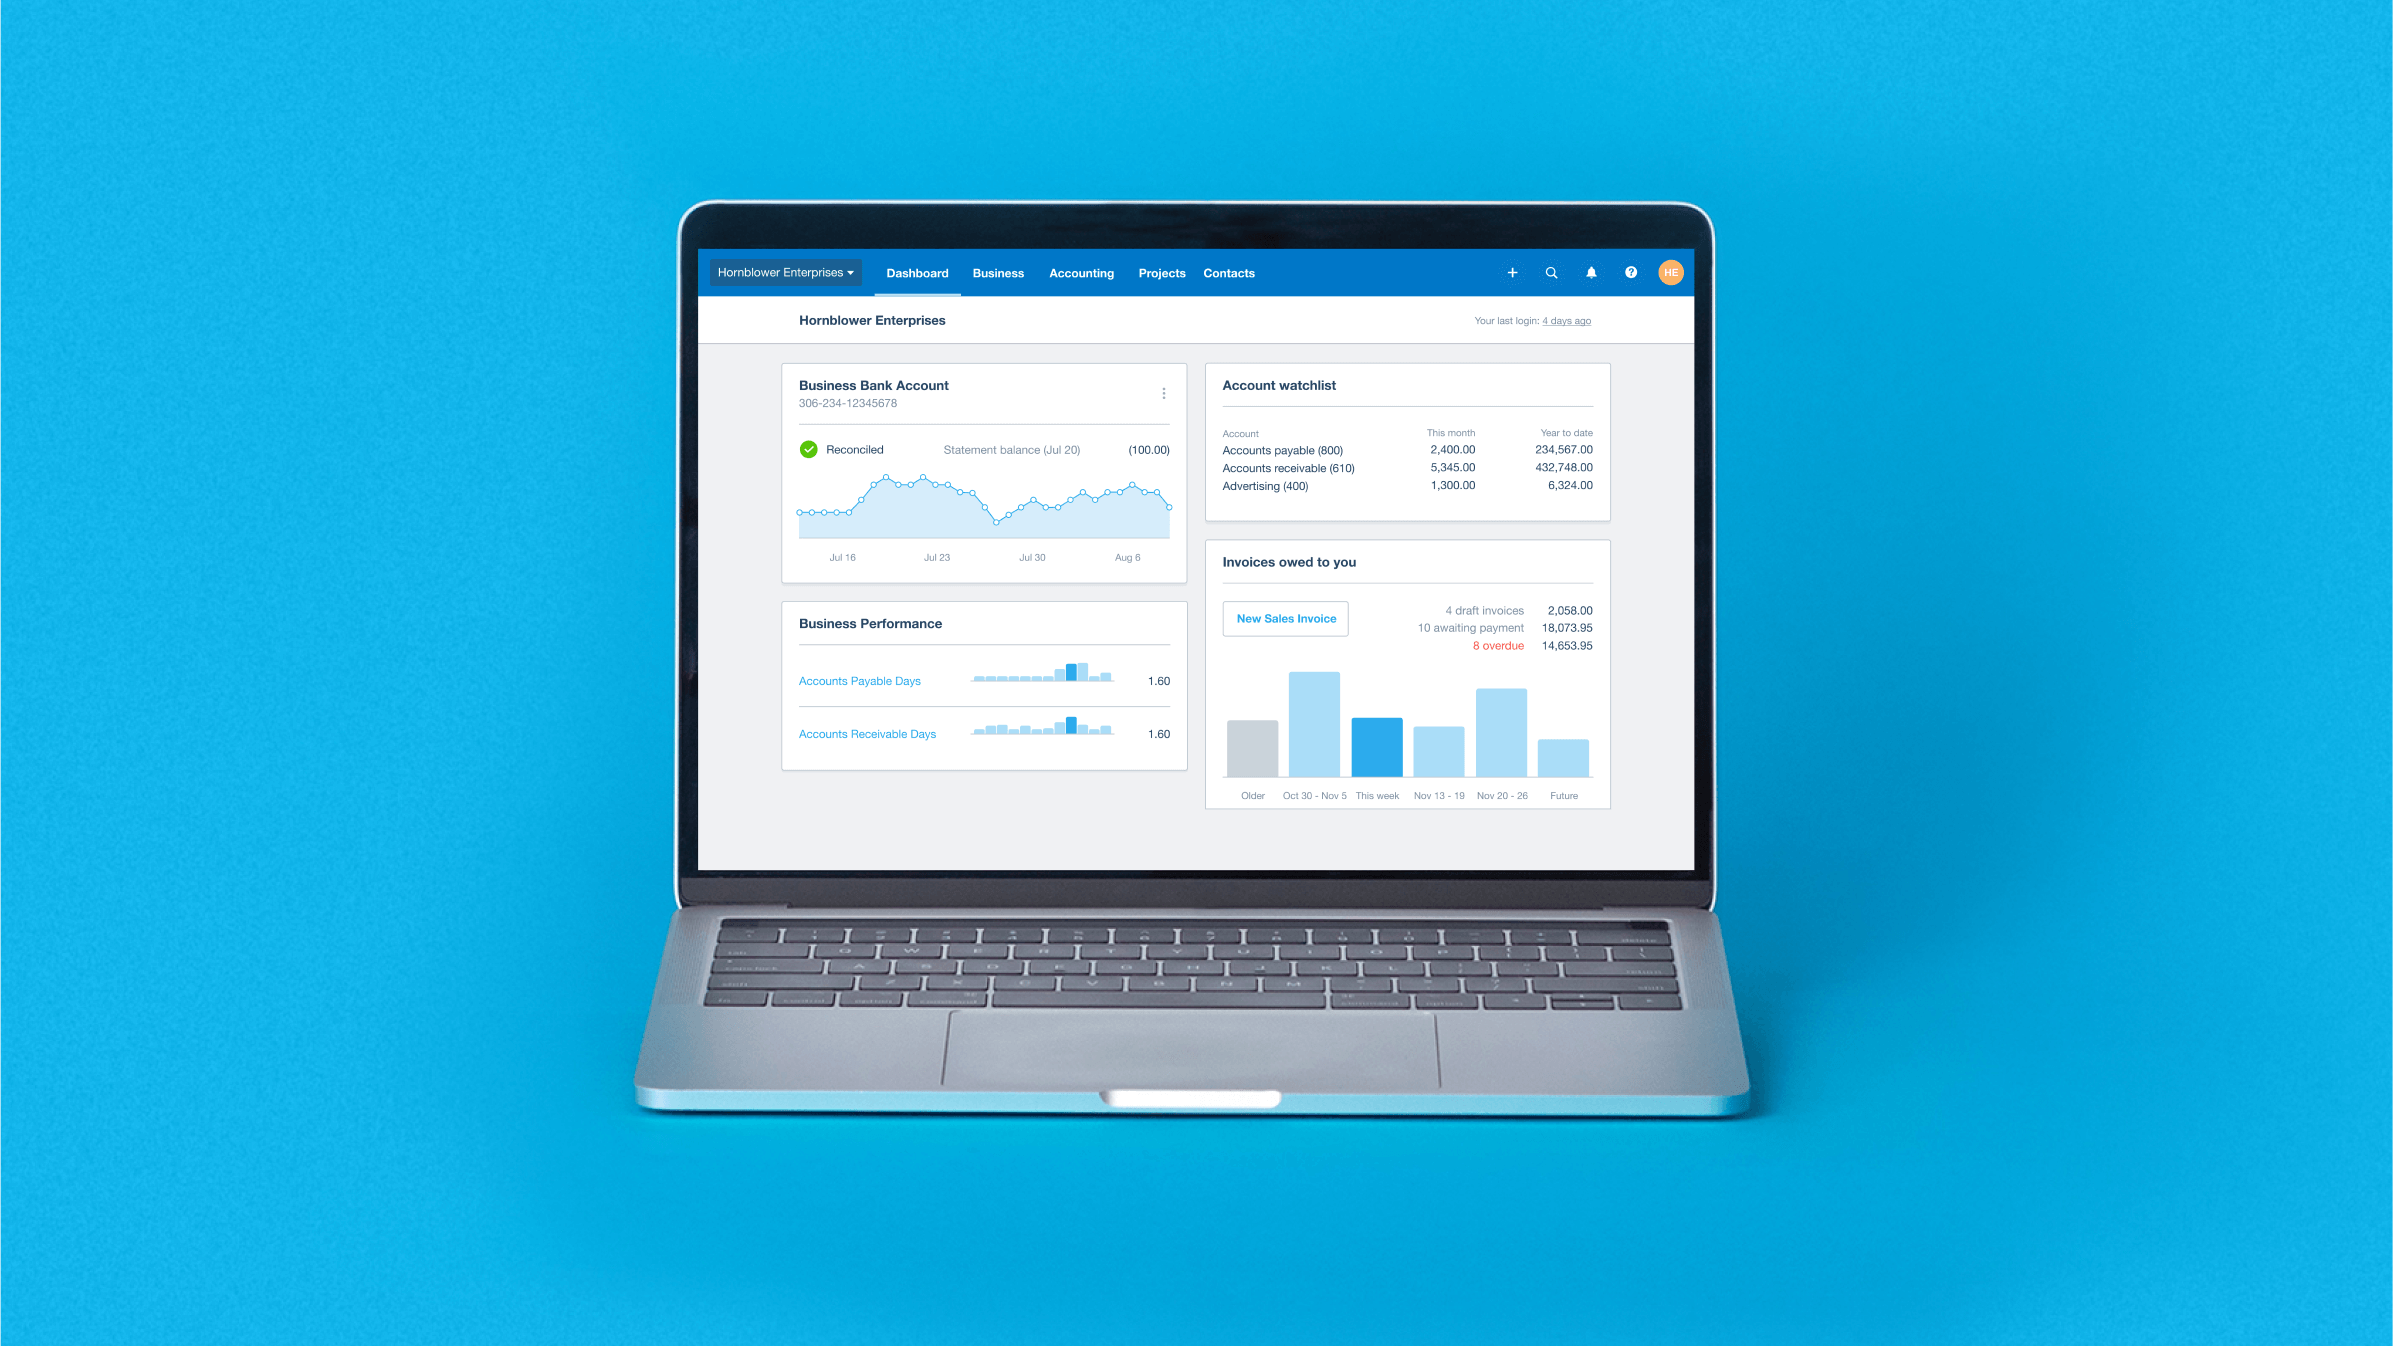 Xero’s cloud accounting software shows four panels: bank account, account watchlist, business performance, and invoices.